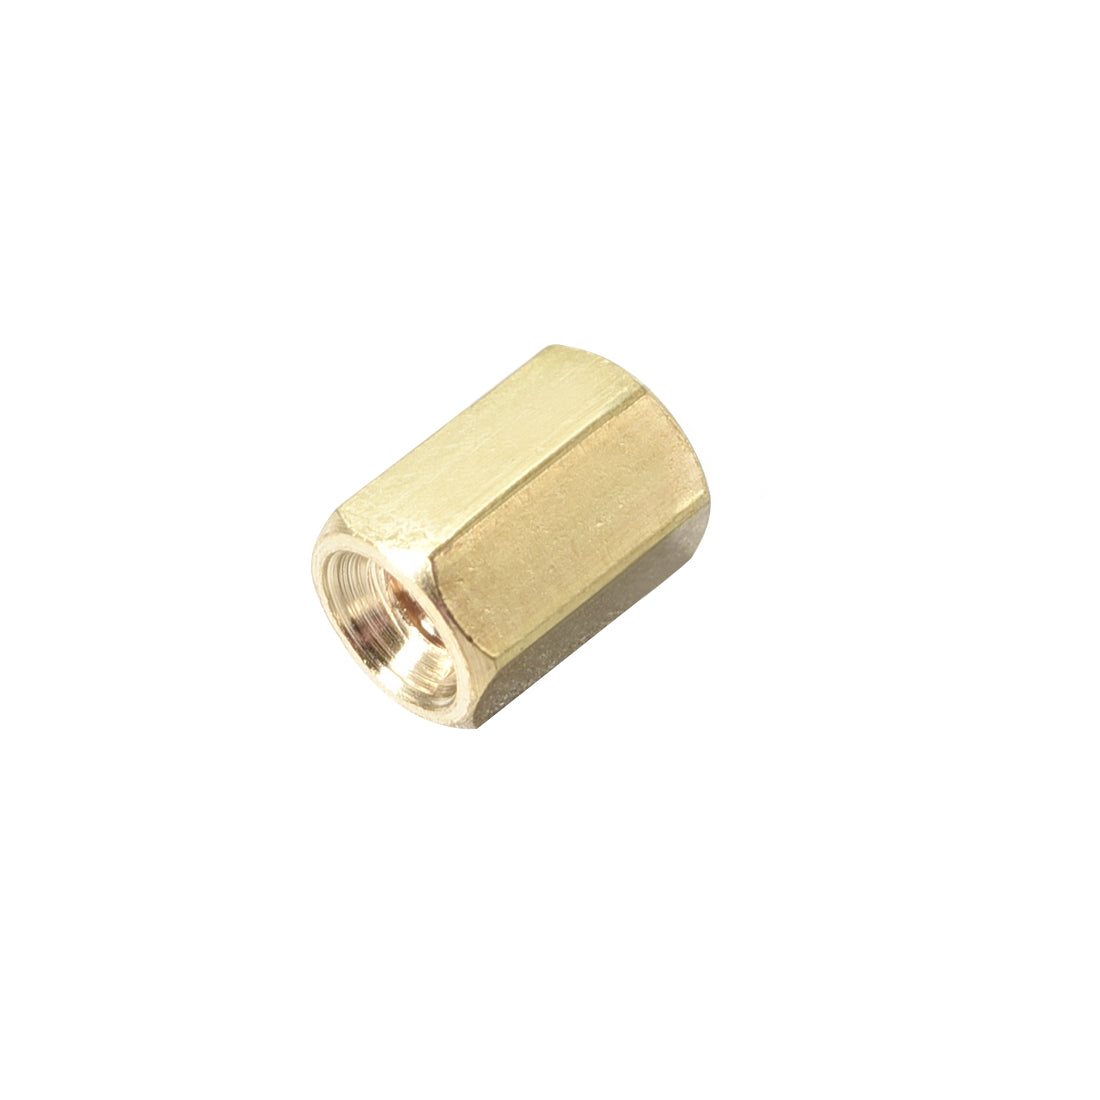 Uxcell Uxcell M2.5 x 22mm Female to Female Hex Brass Spacer Standoff 10pcs